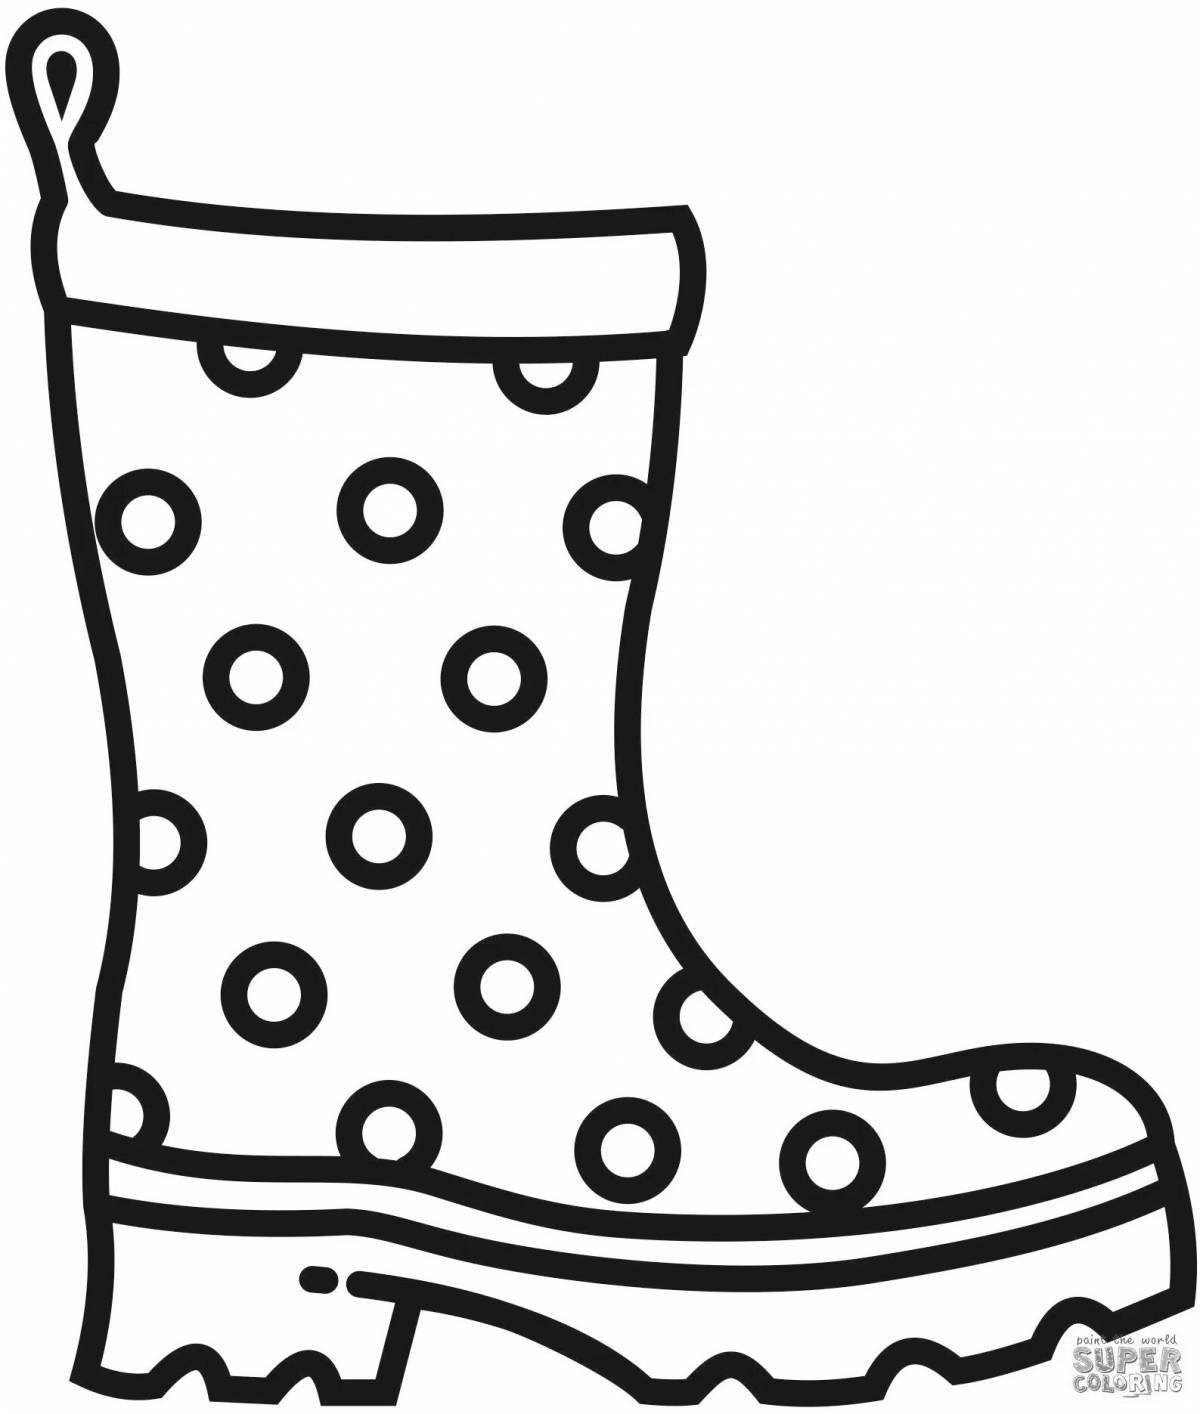 Stunning rubber boots coloring book